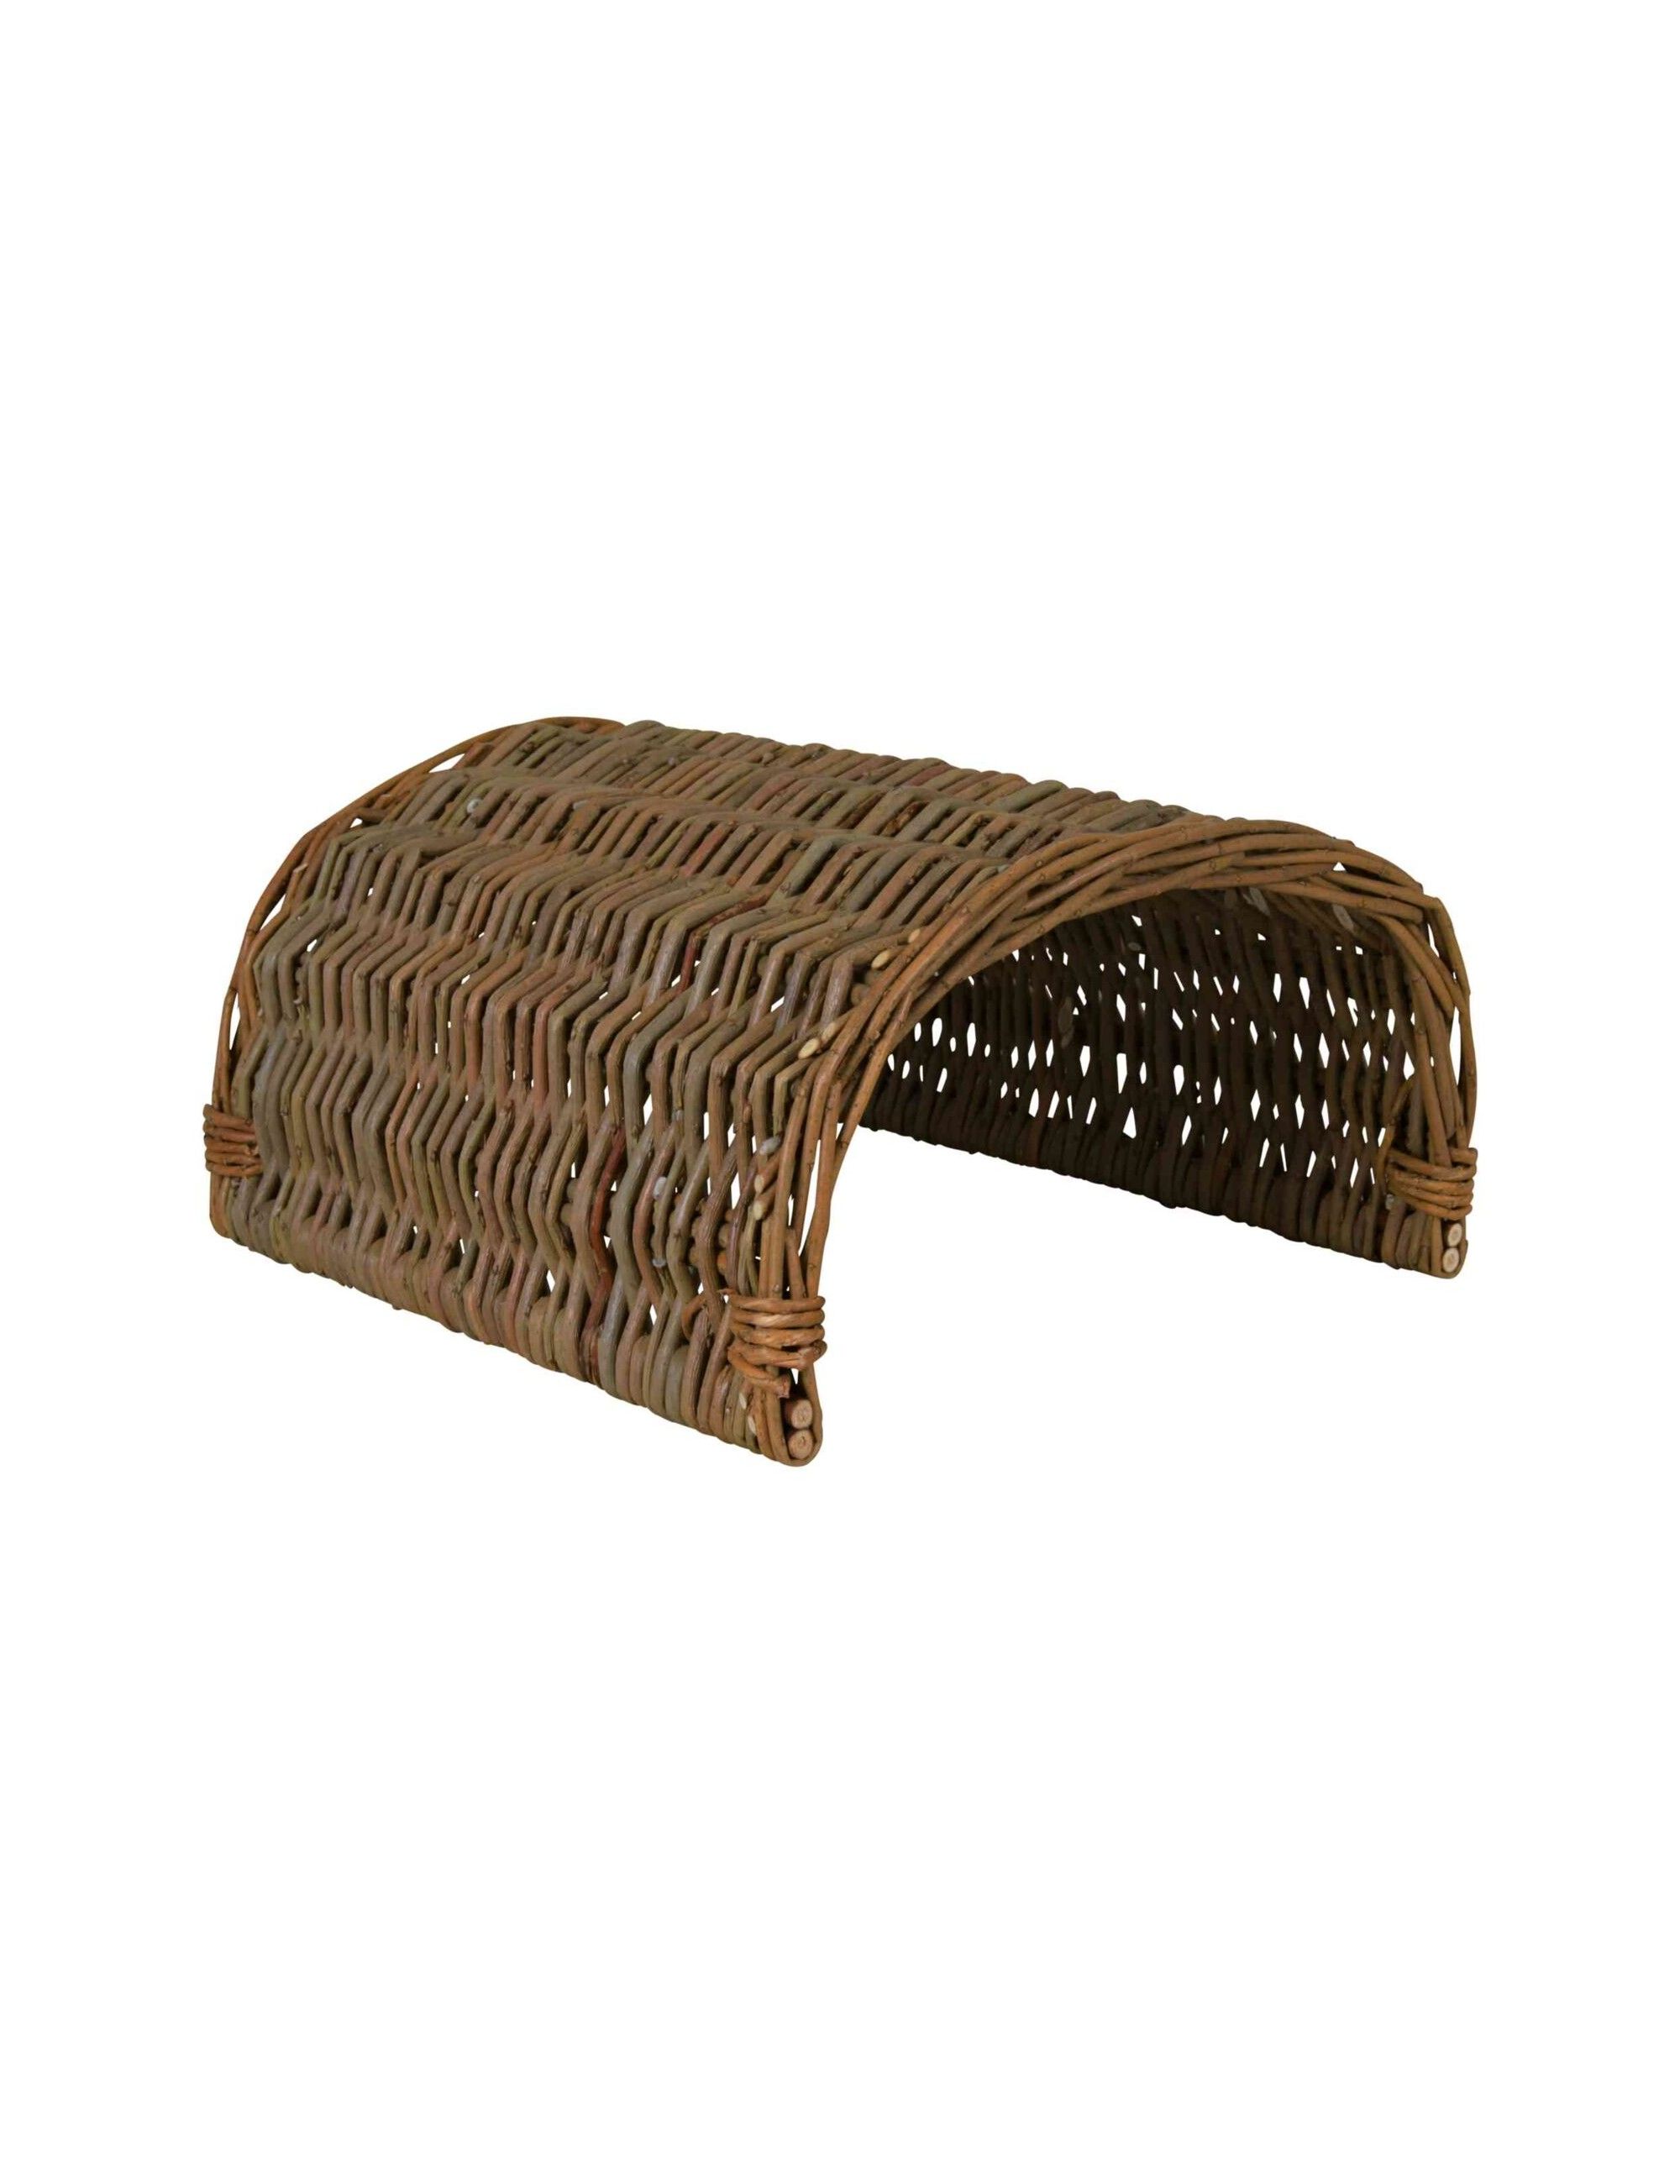 TRIXIE - Wicker Bridge for Rabbits and Rodents